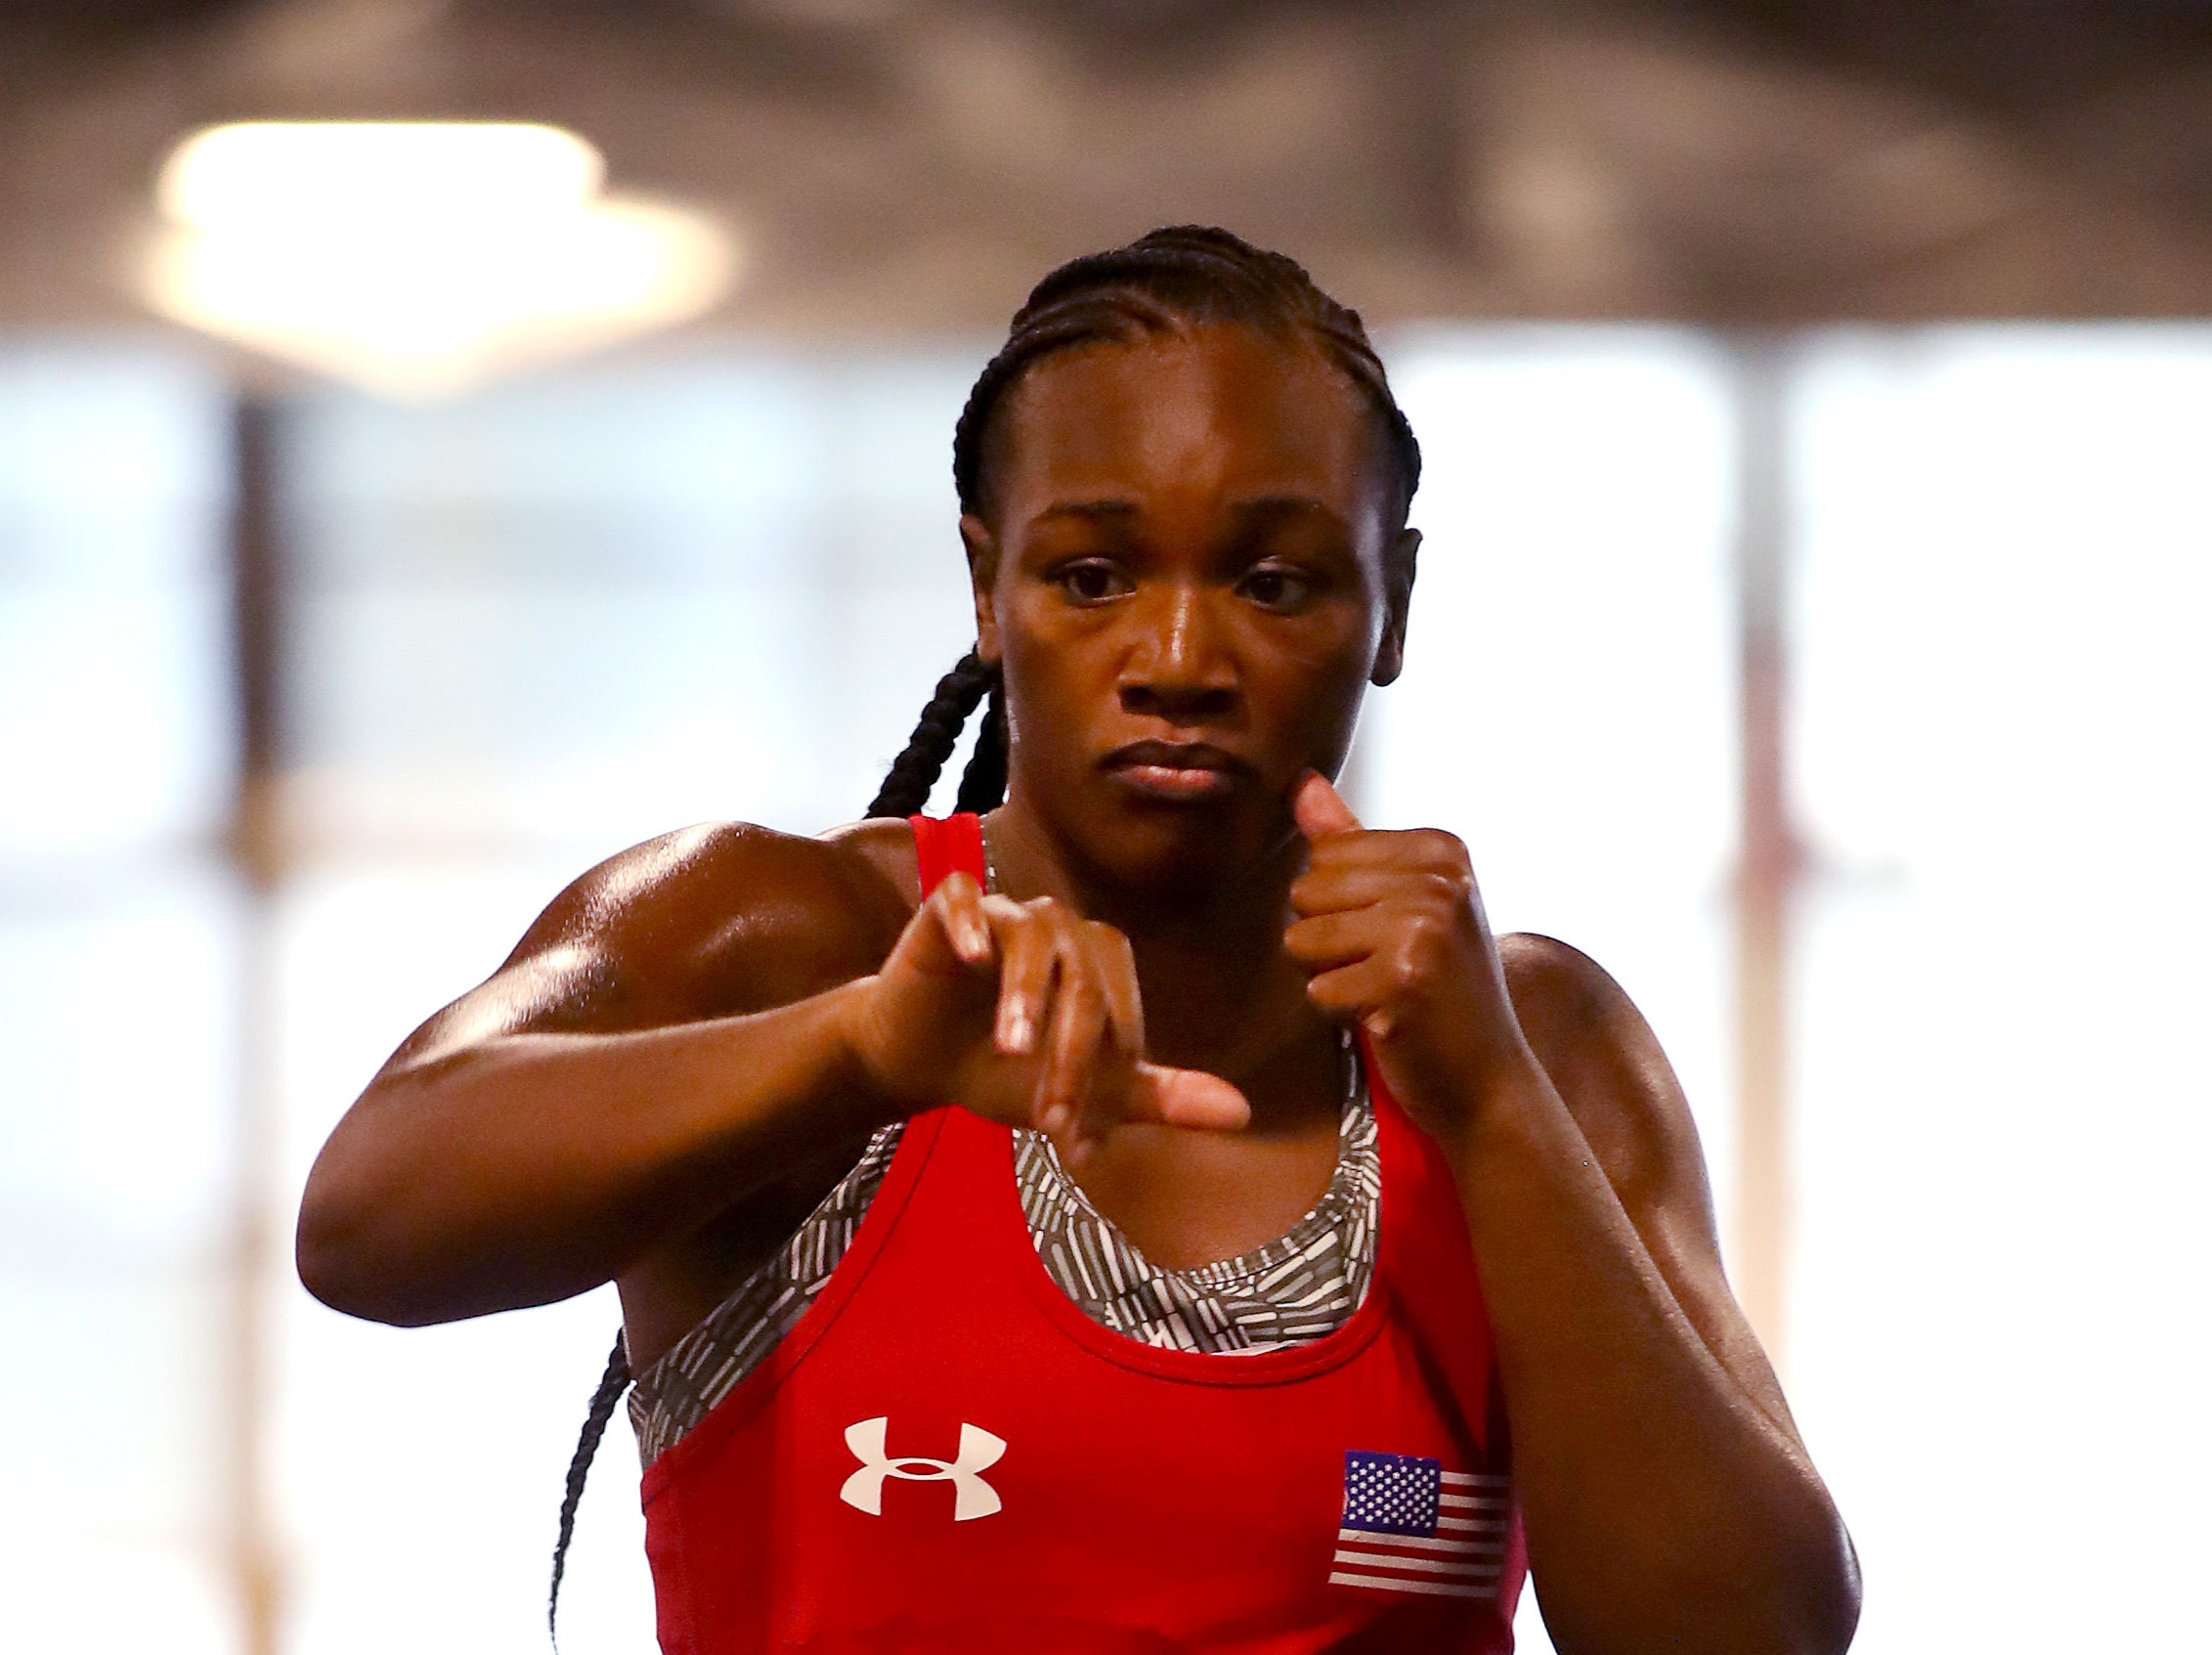 Claressa Shields is considered by many to be the greatest women’s boxer ever